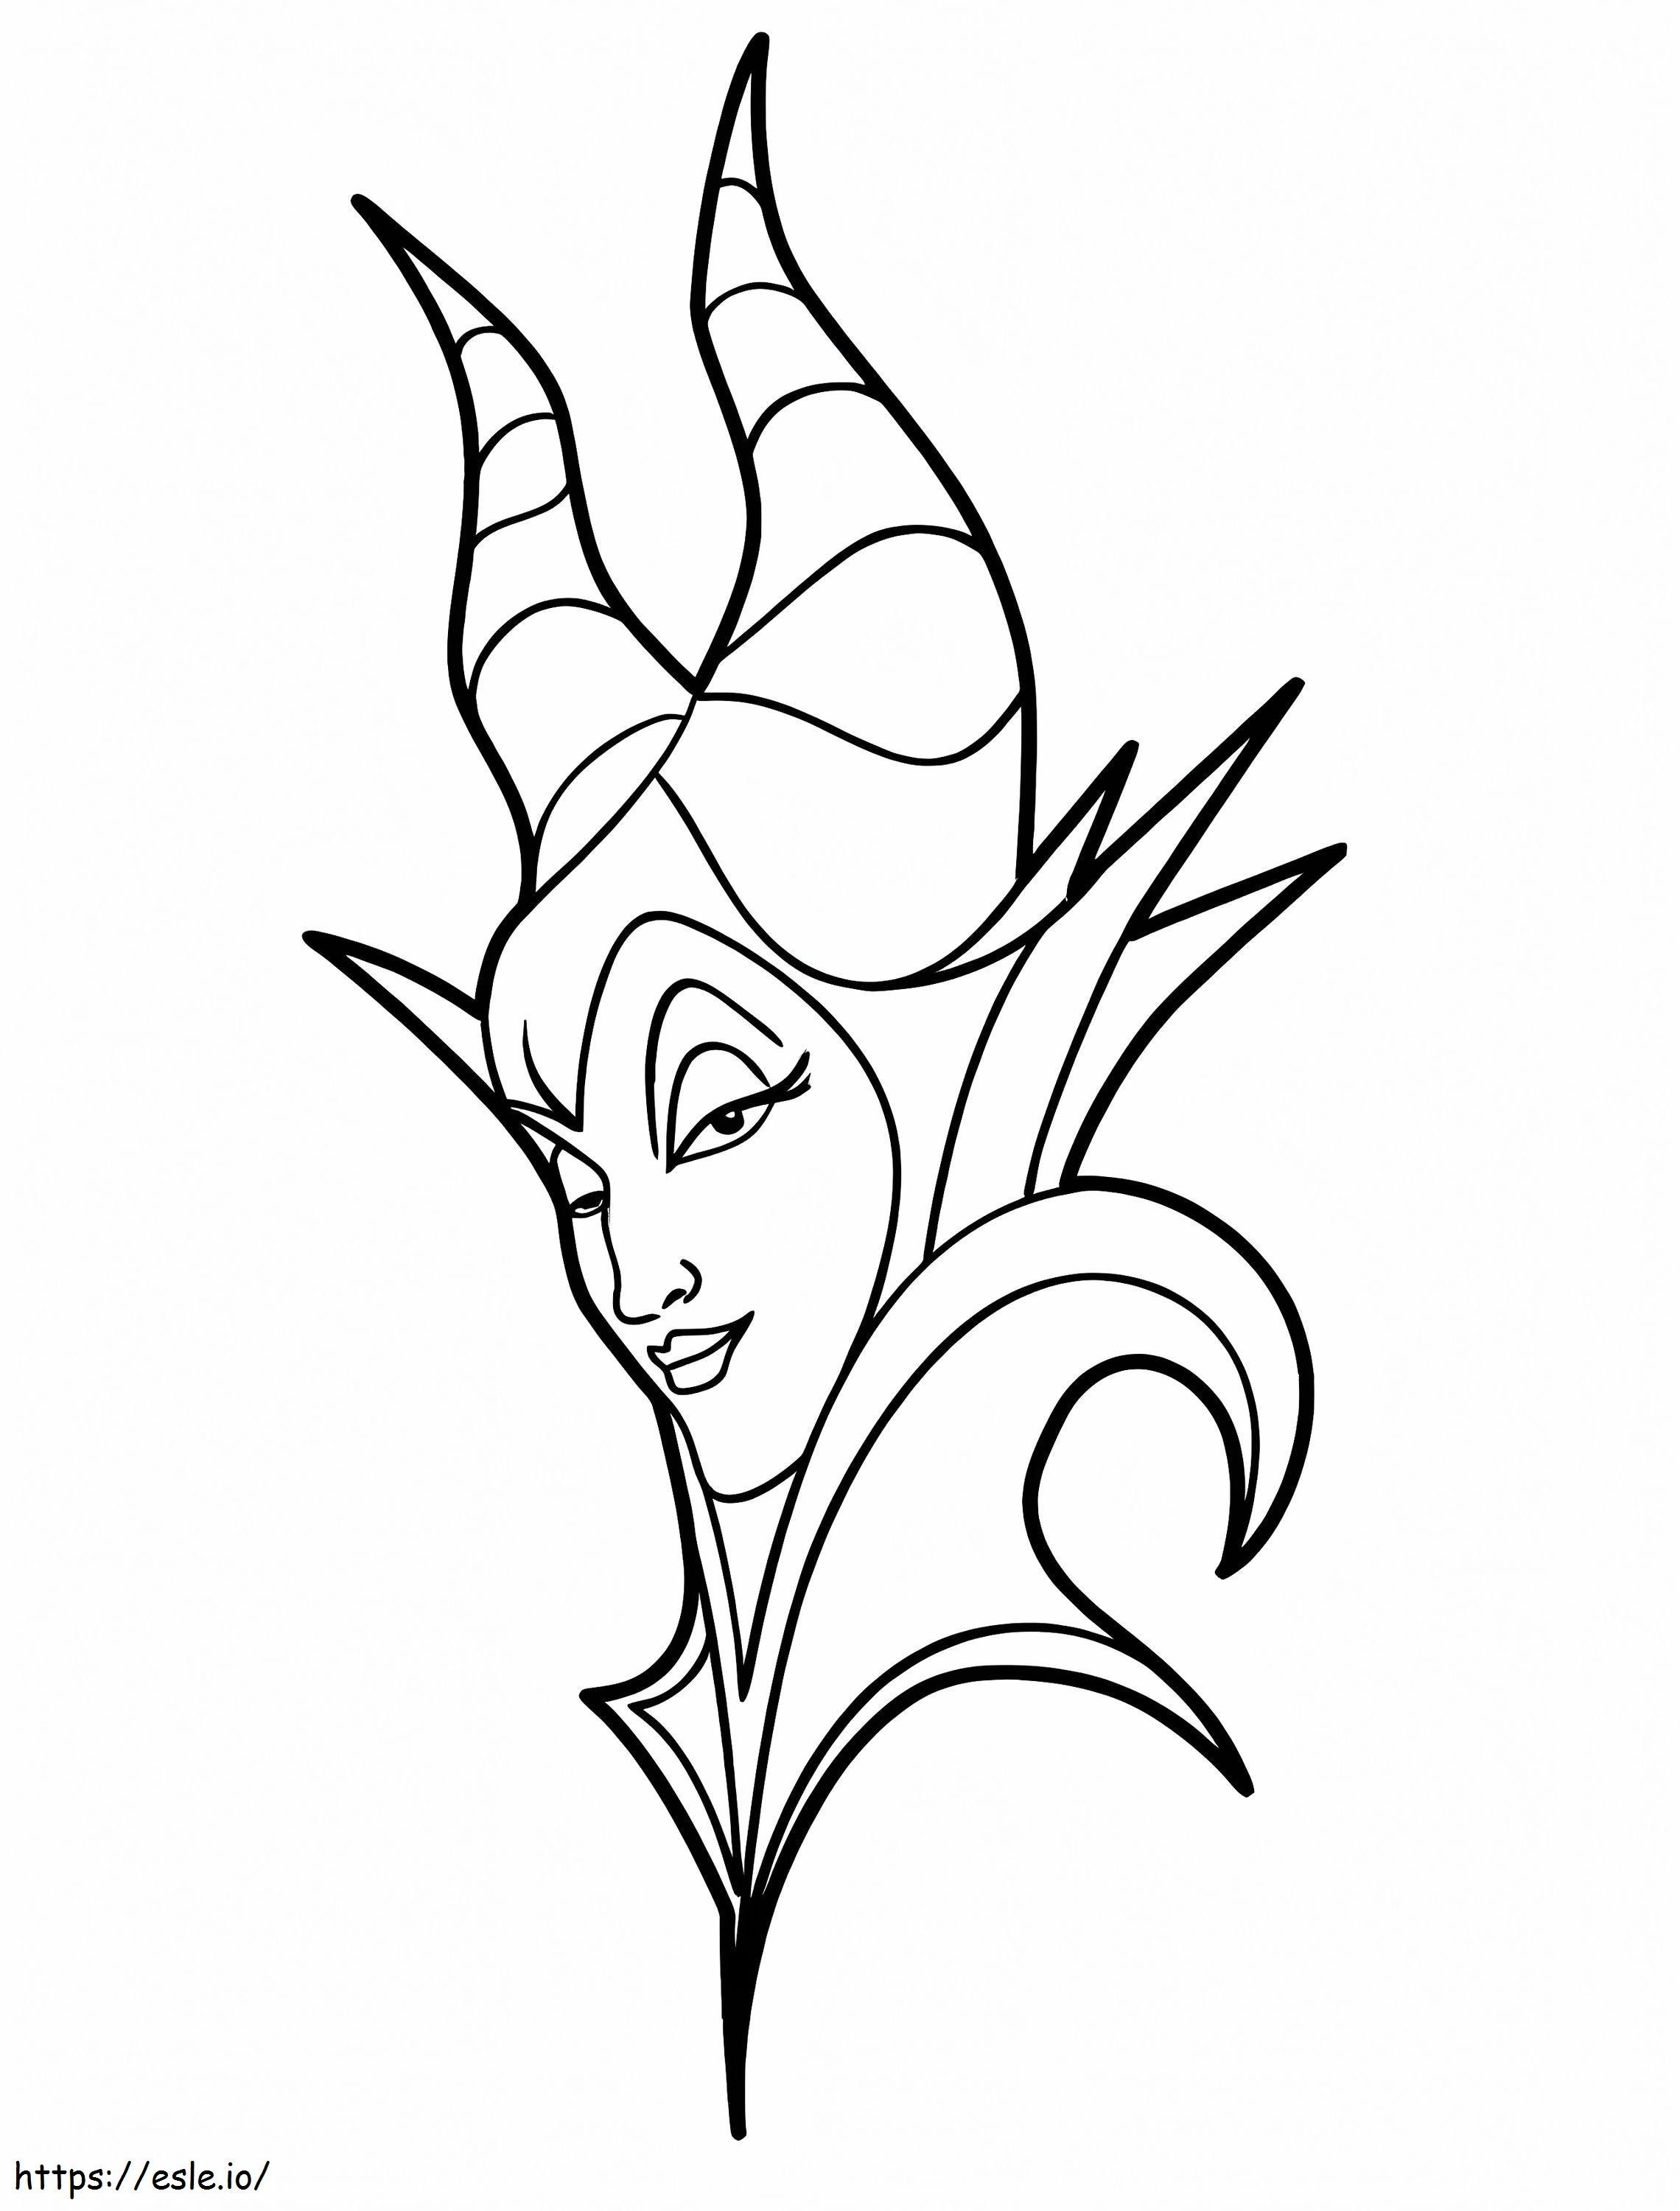 Maleficent Head coloring page